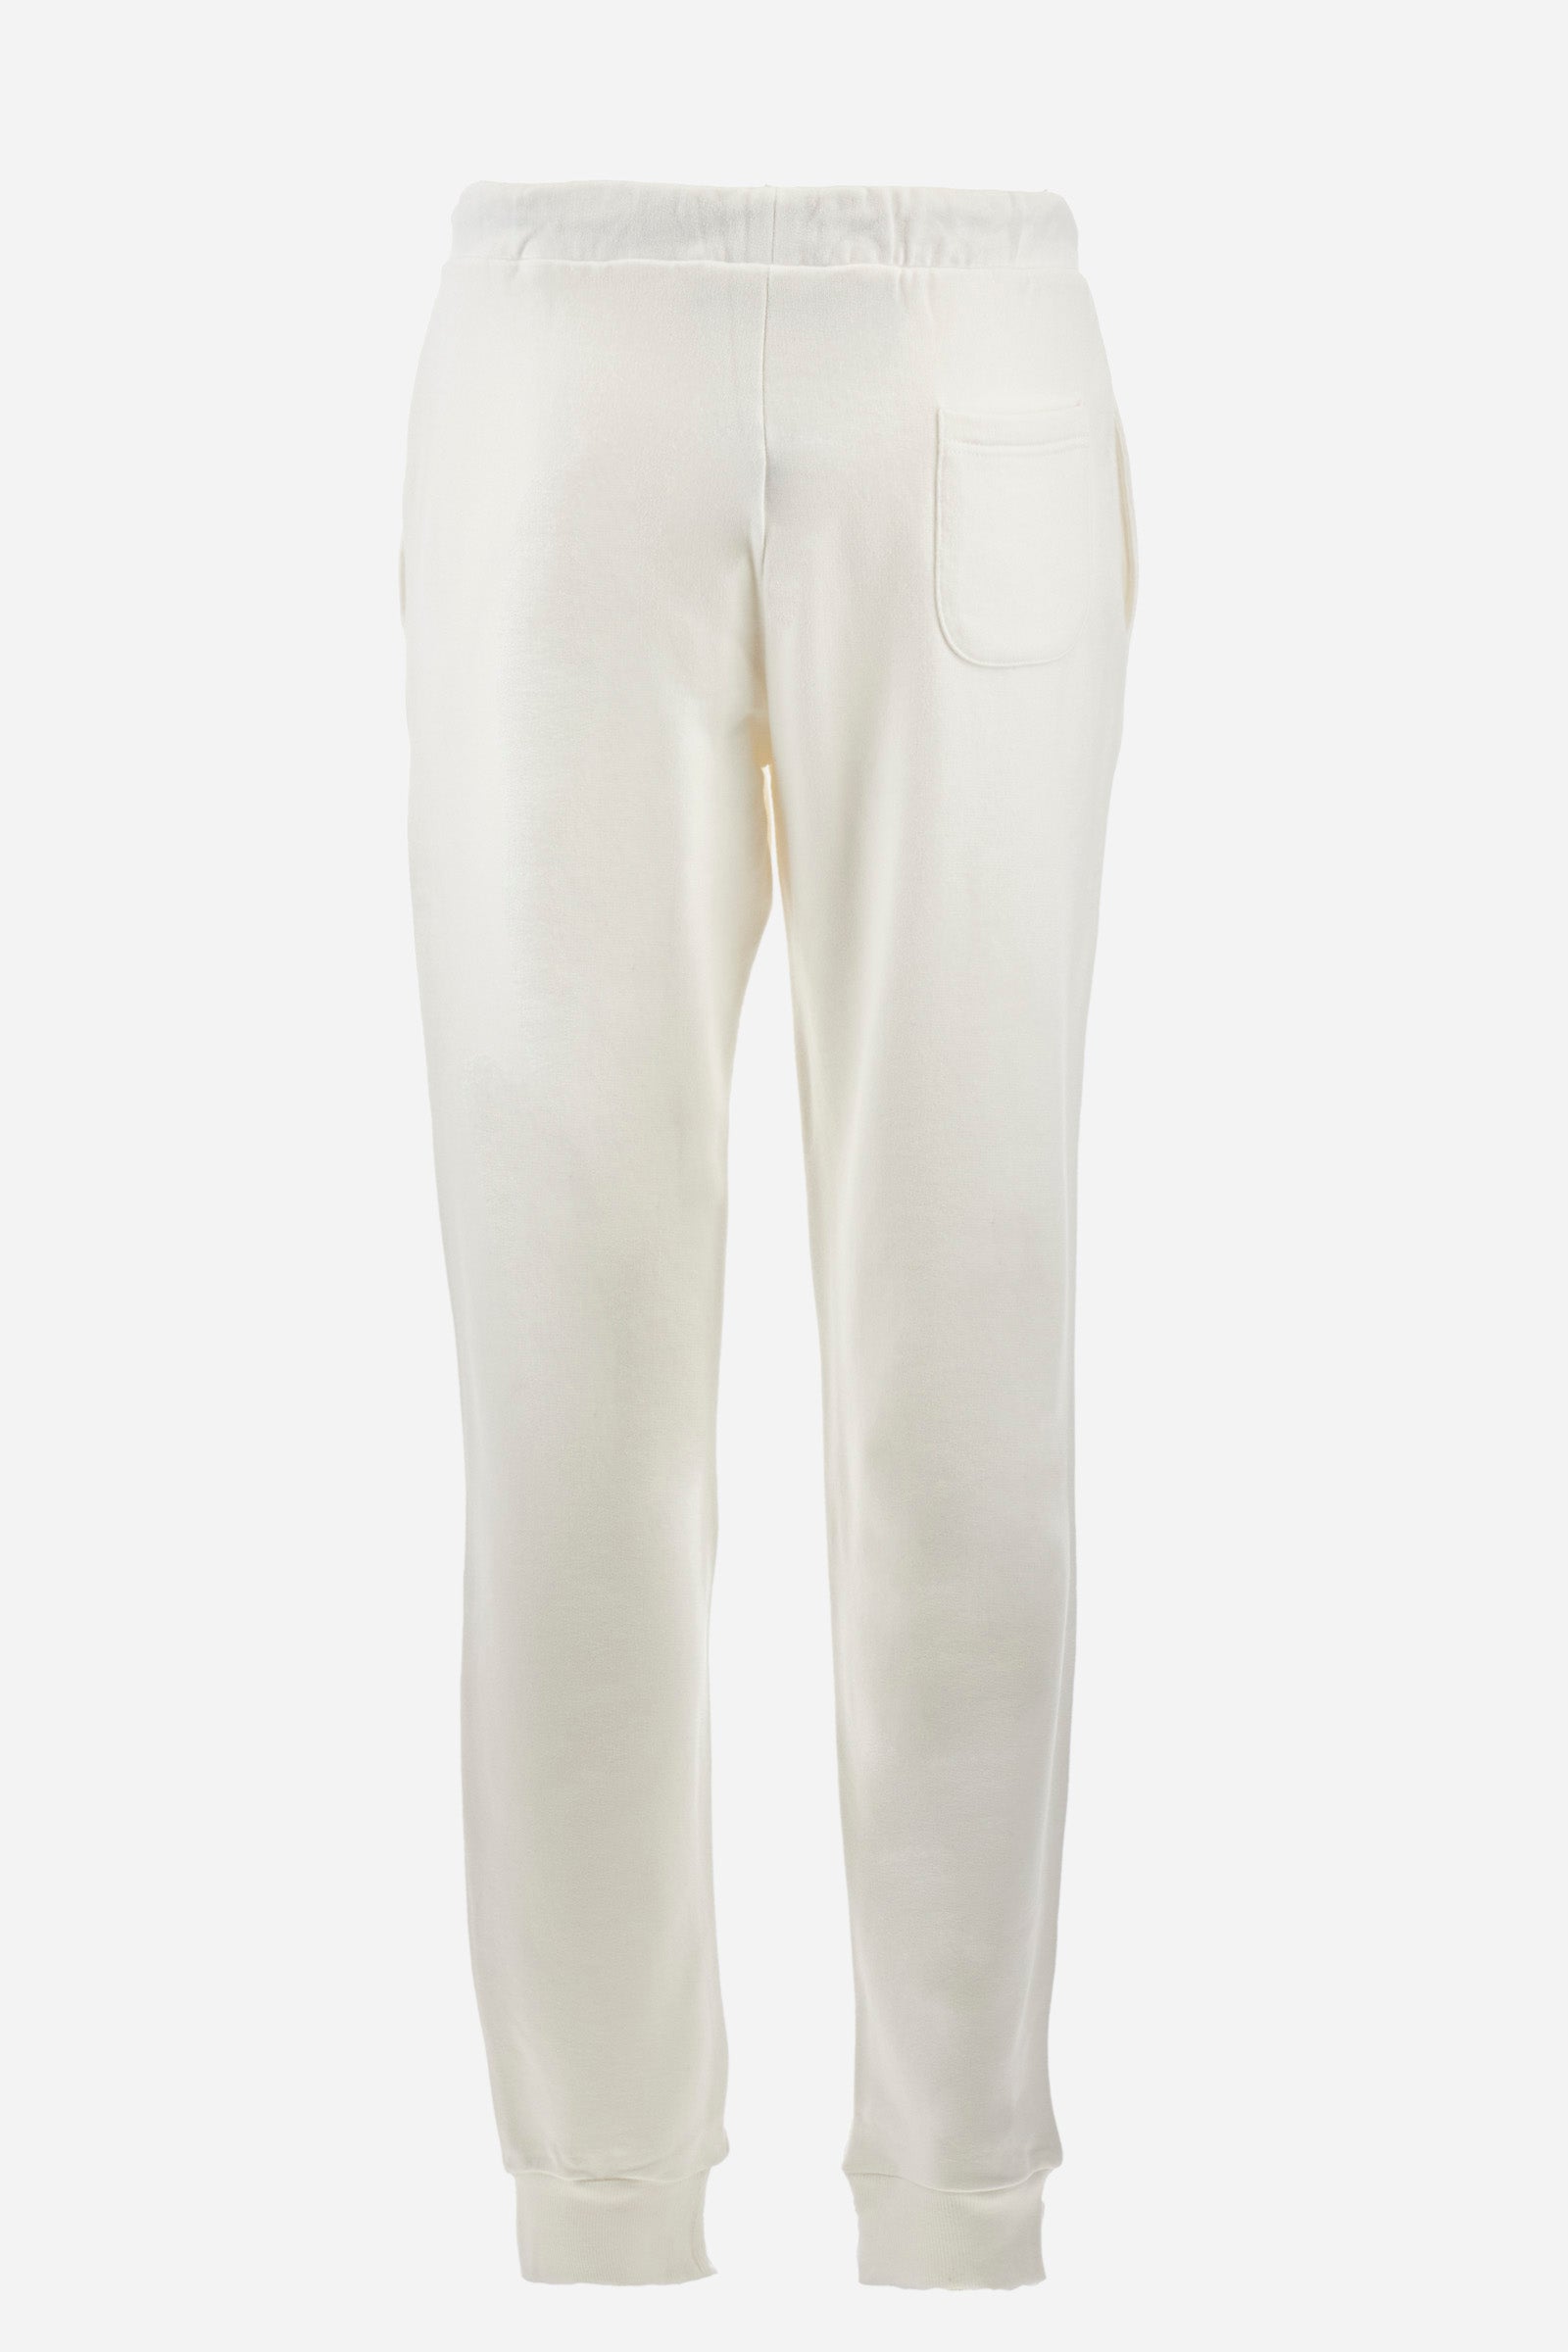 Men's jogging trousers in a regular fit - Paco